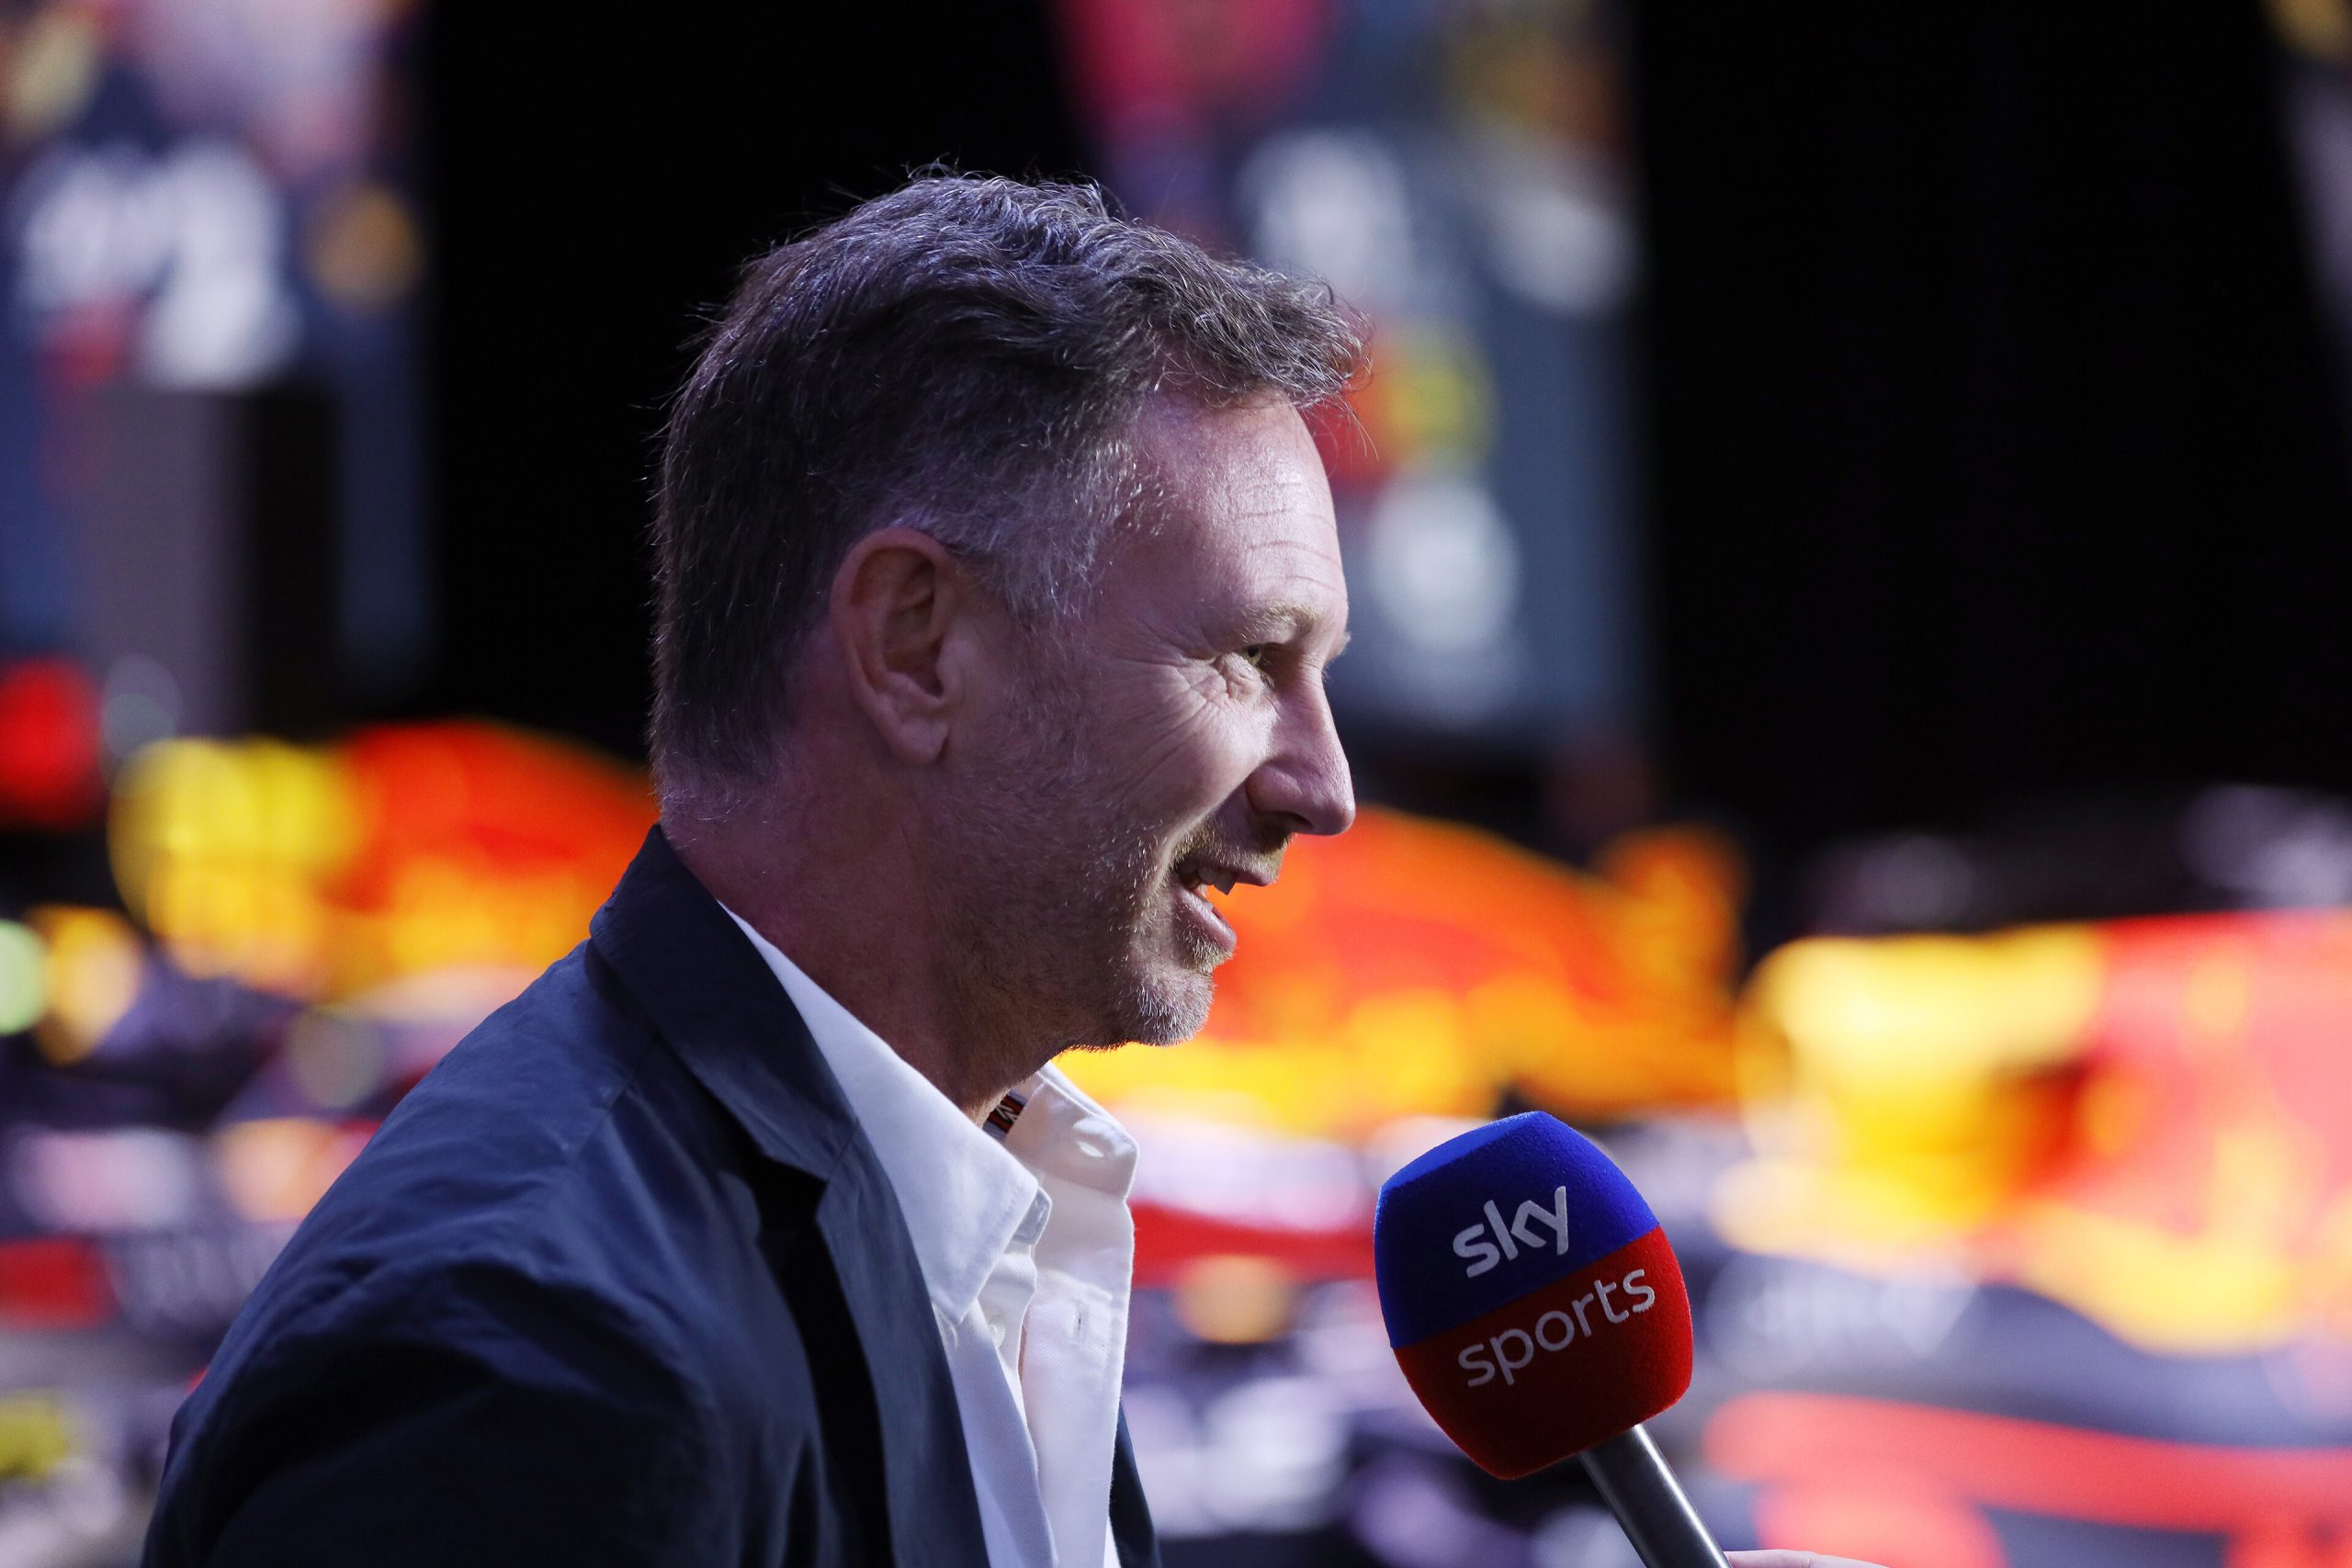 Christian Horner not “fully confident“ if Red Bull will stay within the budget cap for 2022